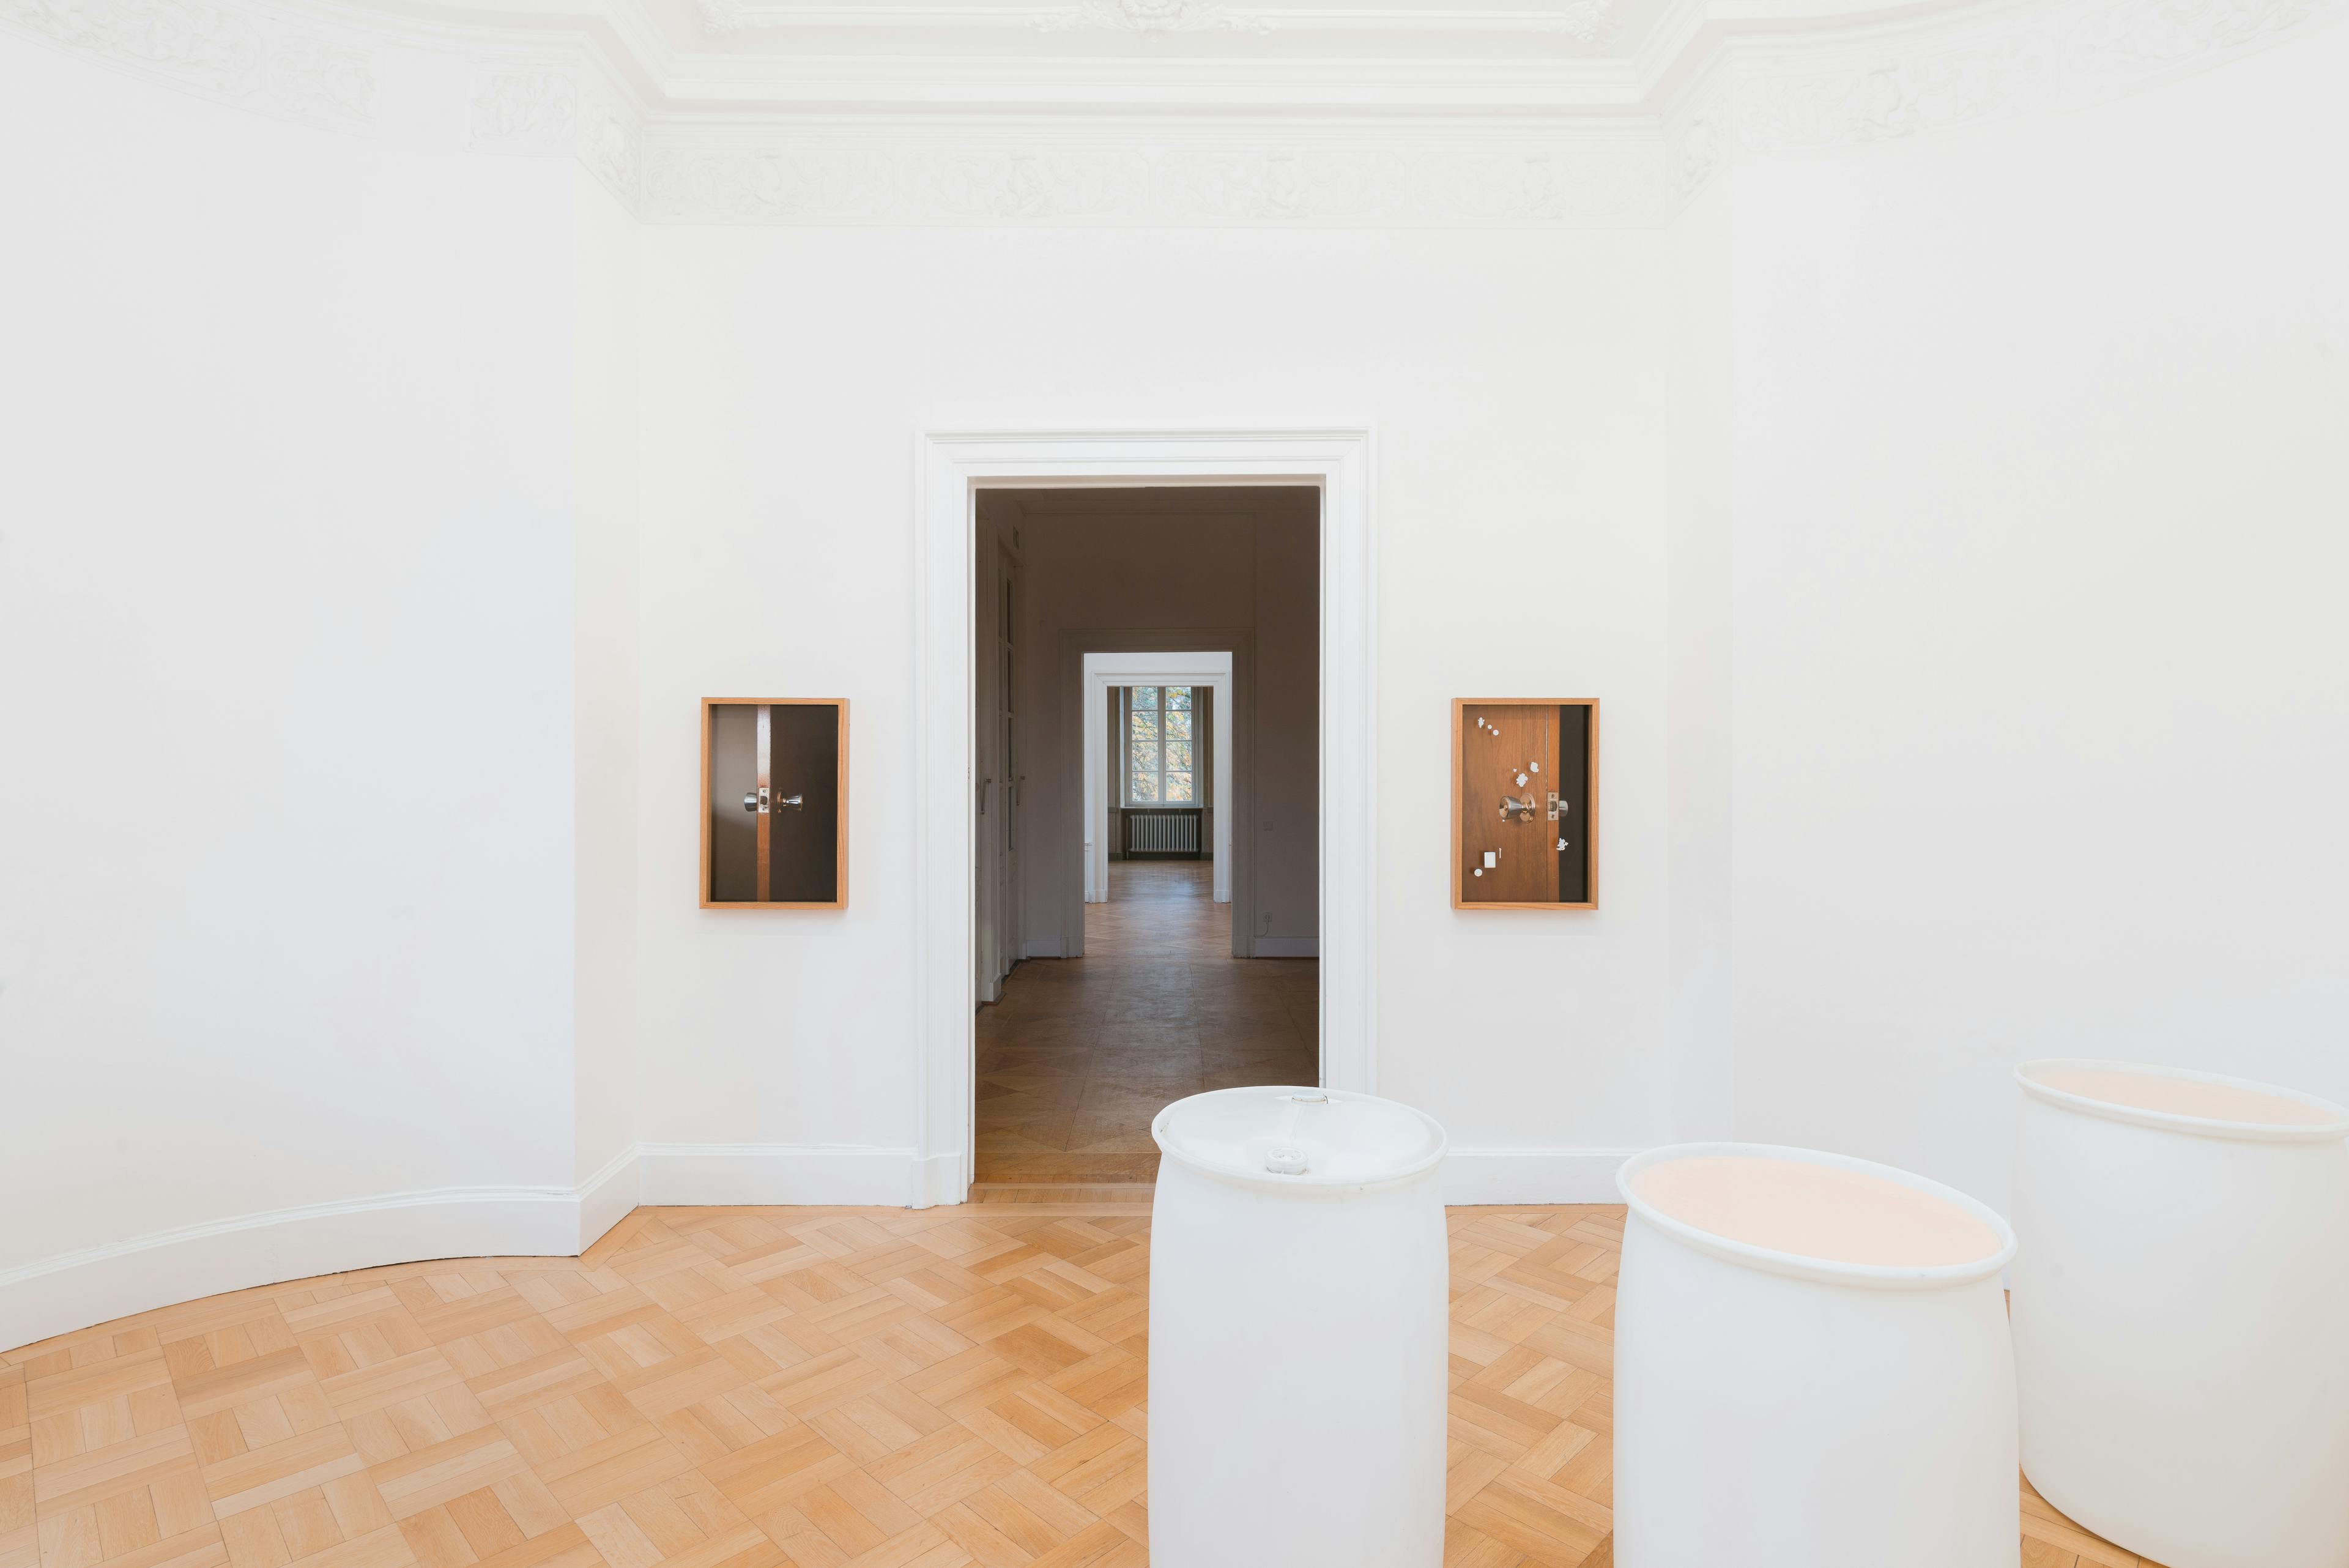 Several artworks are installed in a gallery space. Three white plastic barrel sculptures are placed on the wood tile floor. Two wood-framed photographs of a doorknob are mounted on the white wall